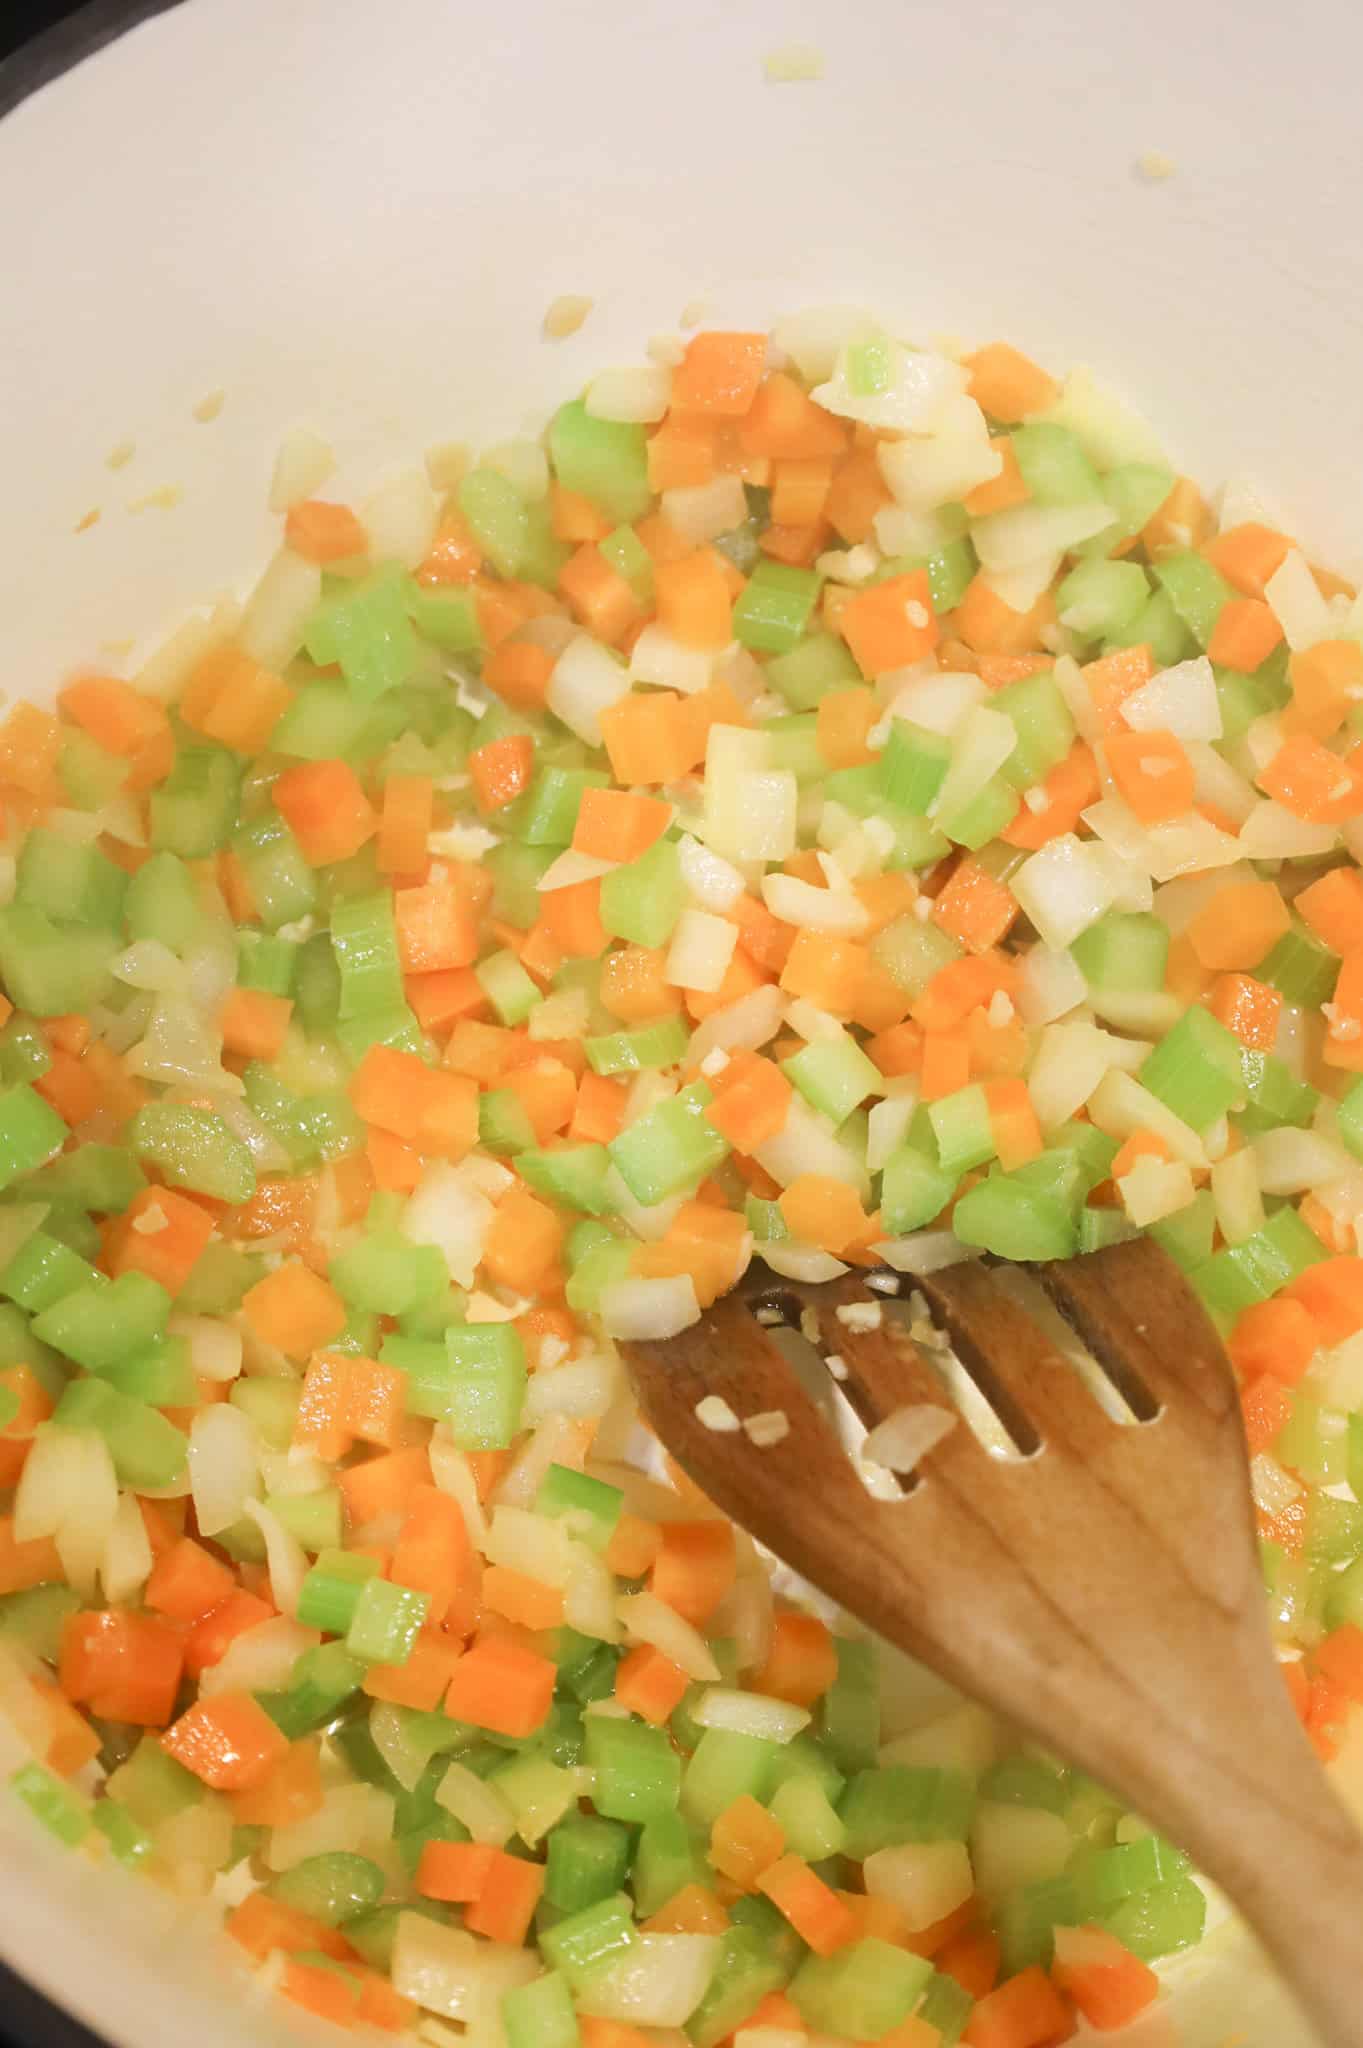 minced garlic and diced vegetables being stirred together